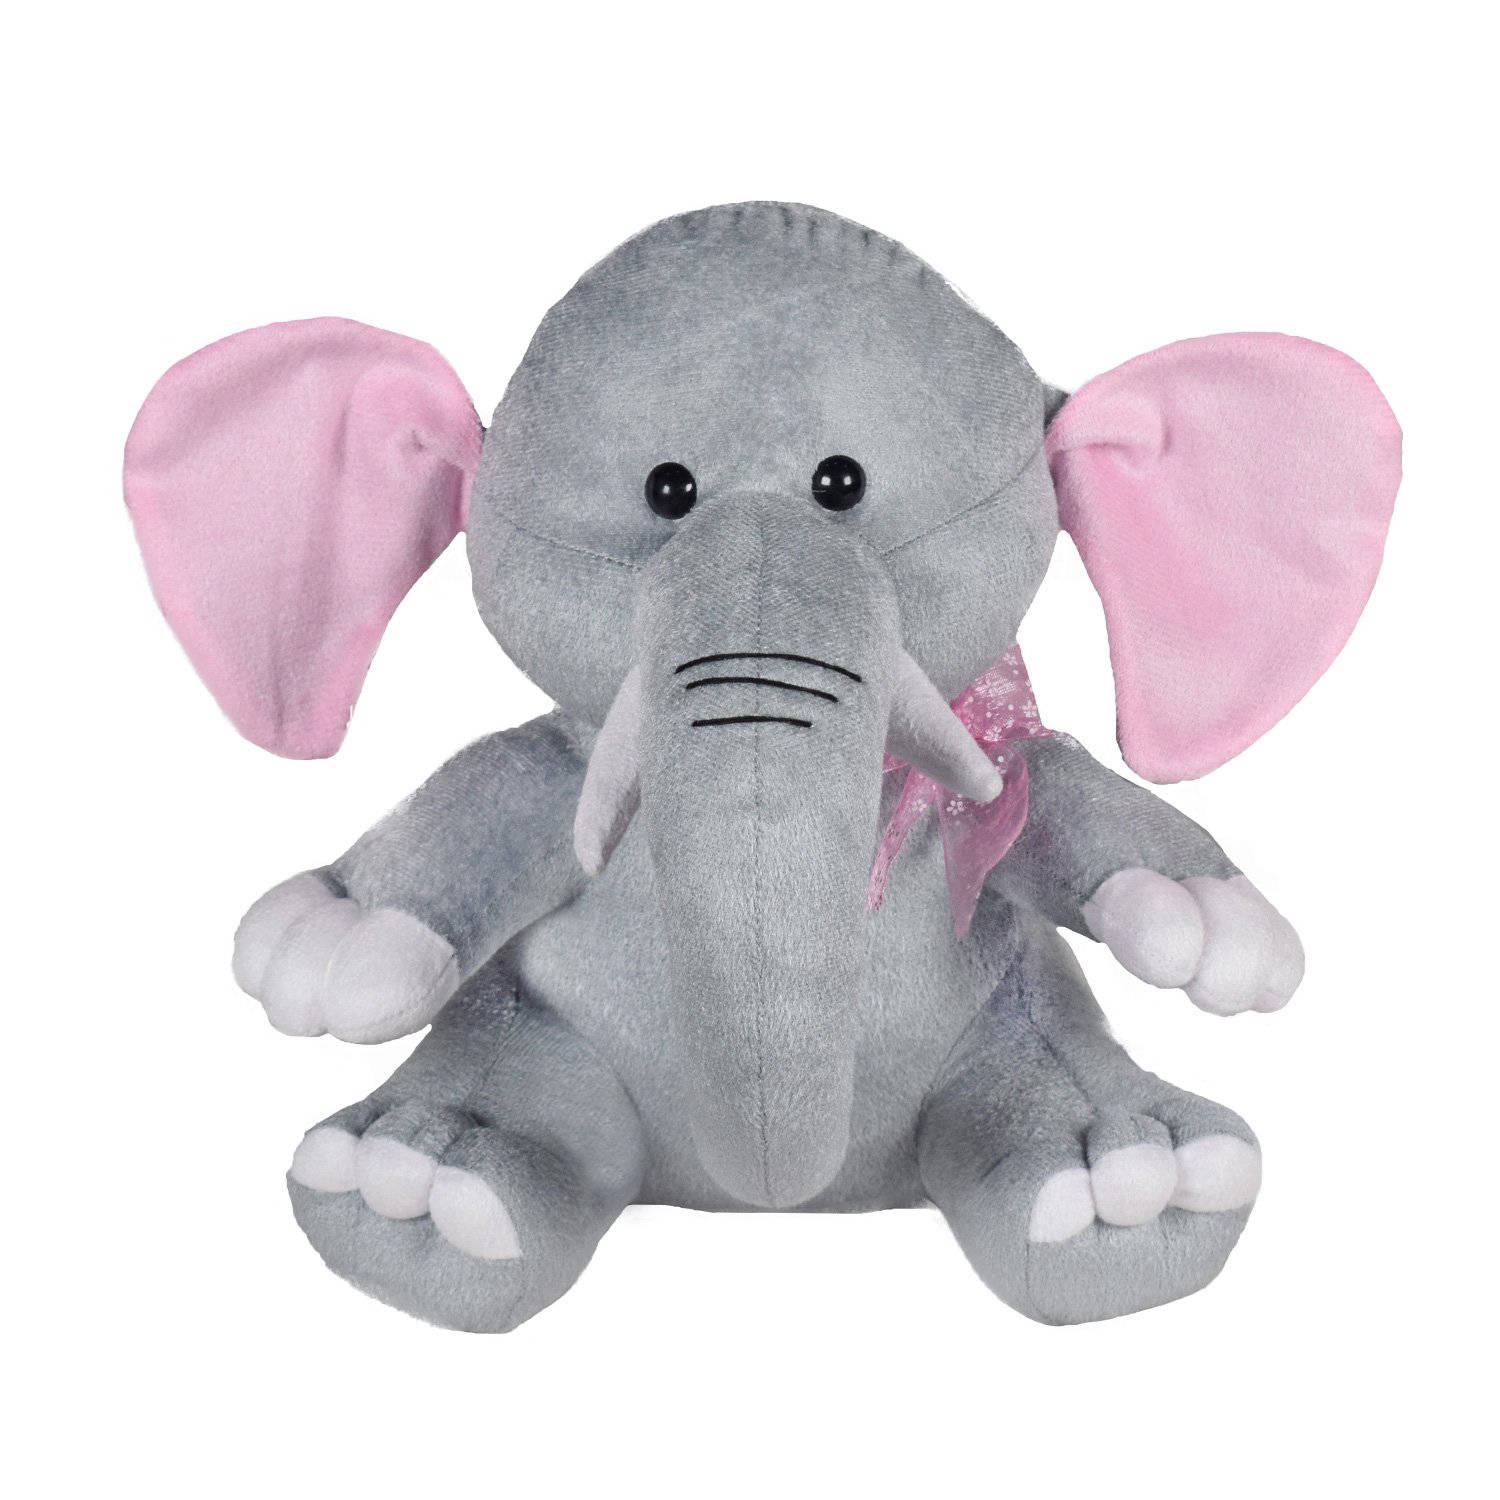 Caption: Cute And Cuddly Giant Elephant Beanie Boos Toy Background